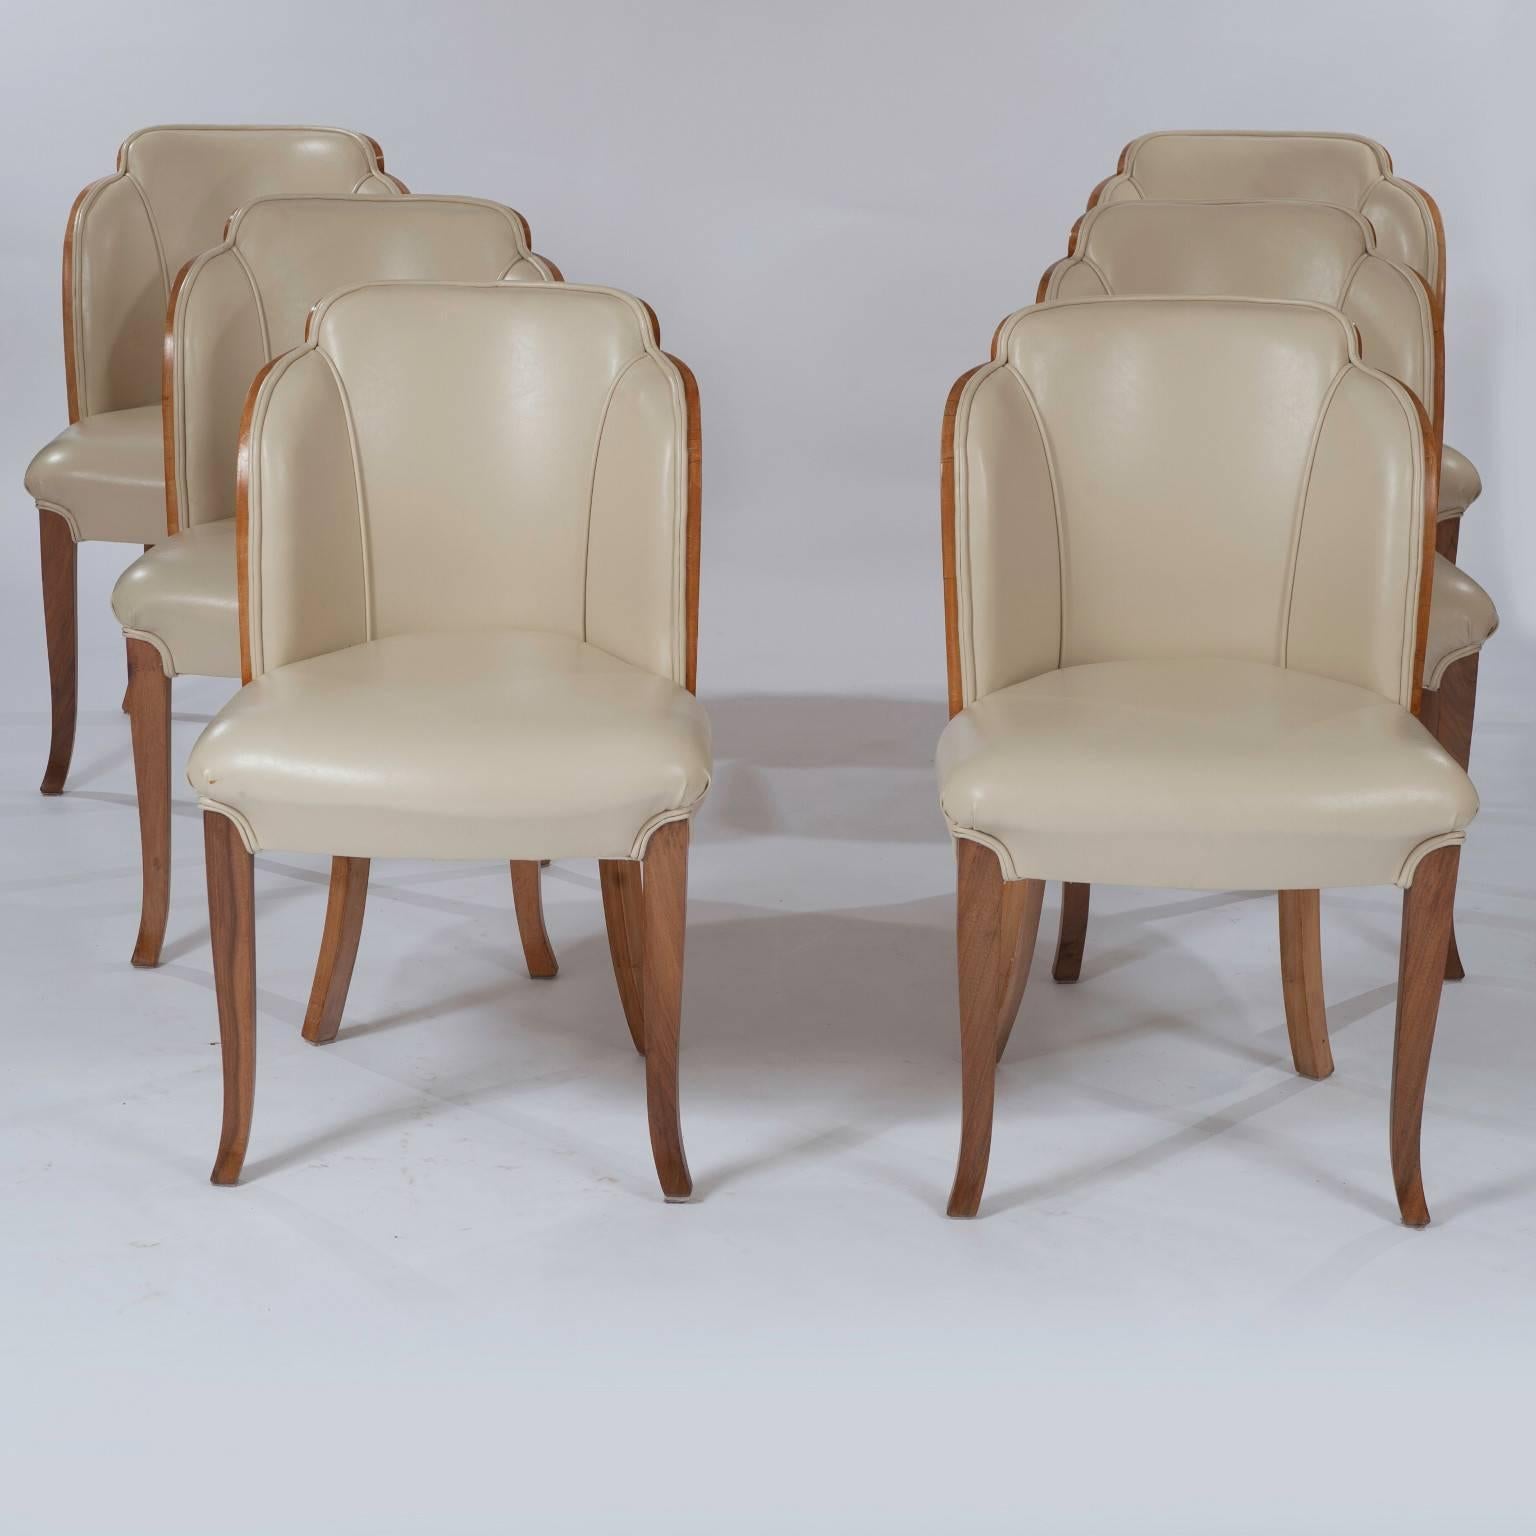 Epstein furniture was originally founded in East London by Polish immigrants in the 1890s. The firm passed to brothers Harry and Lou Epstein and the pair turned their attention to the production of Art Deco forms from the 1930s-1950s. Finished to